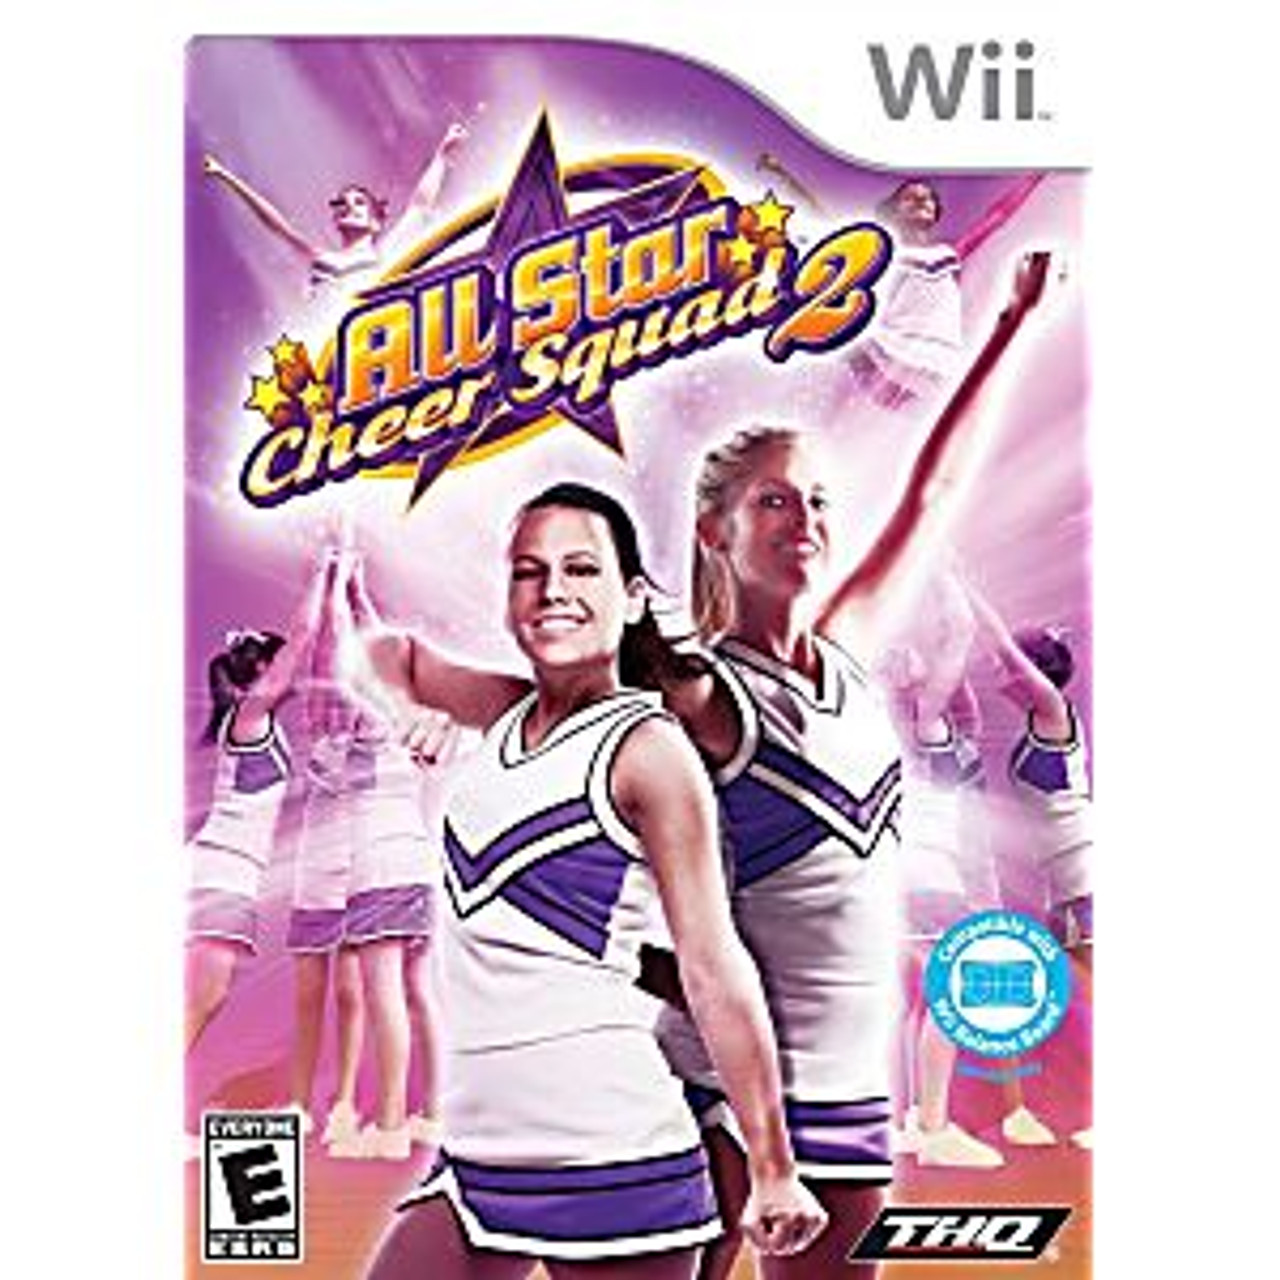 ALL STAR CHEER SQUAD 2